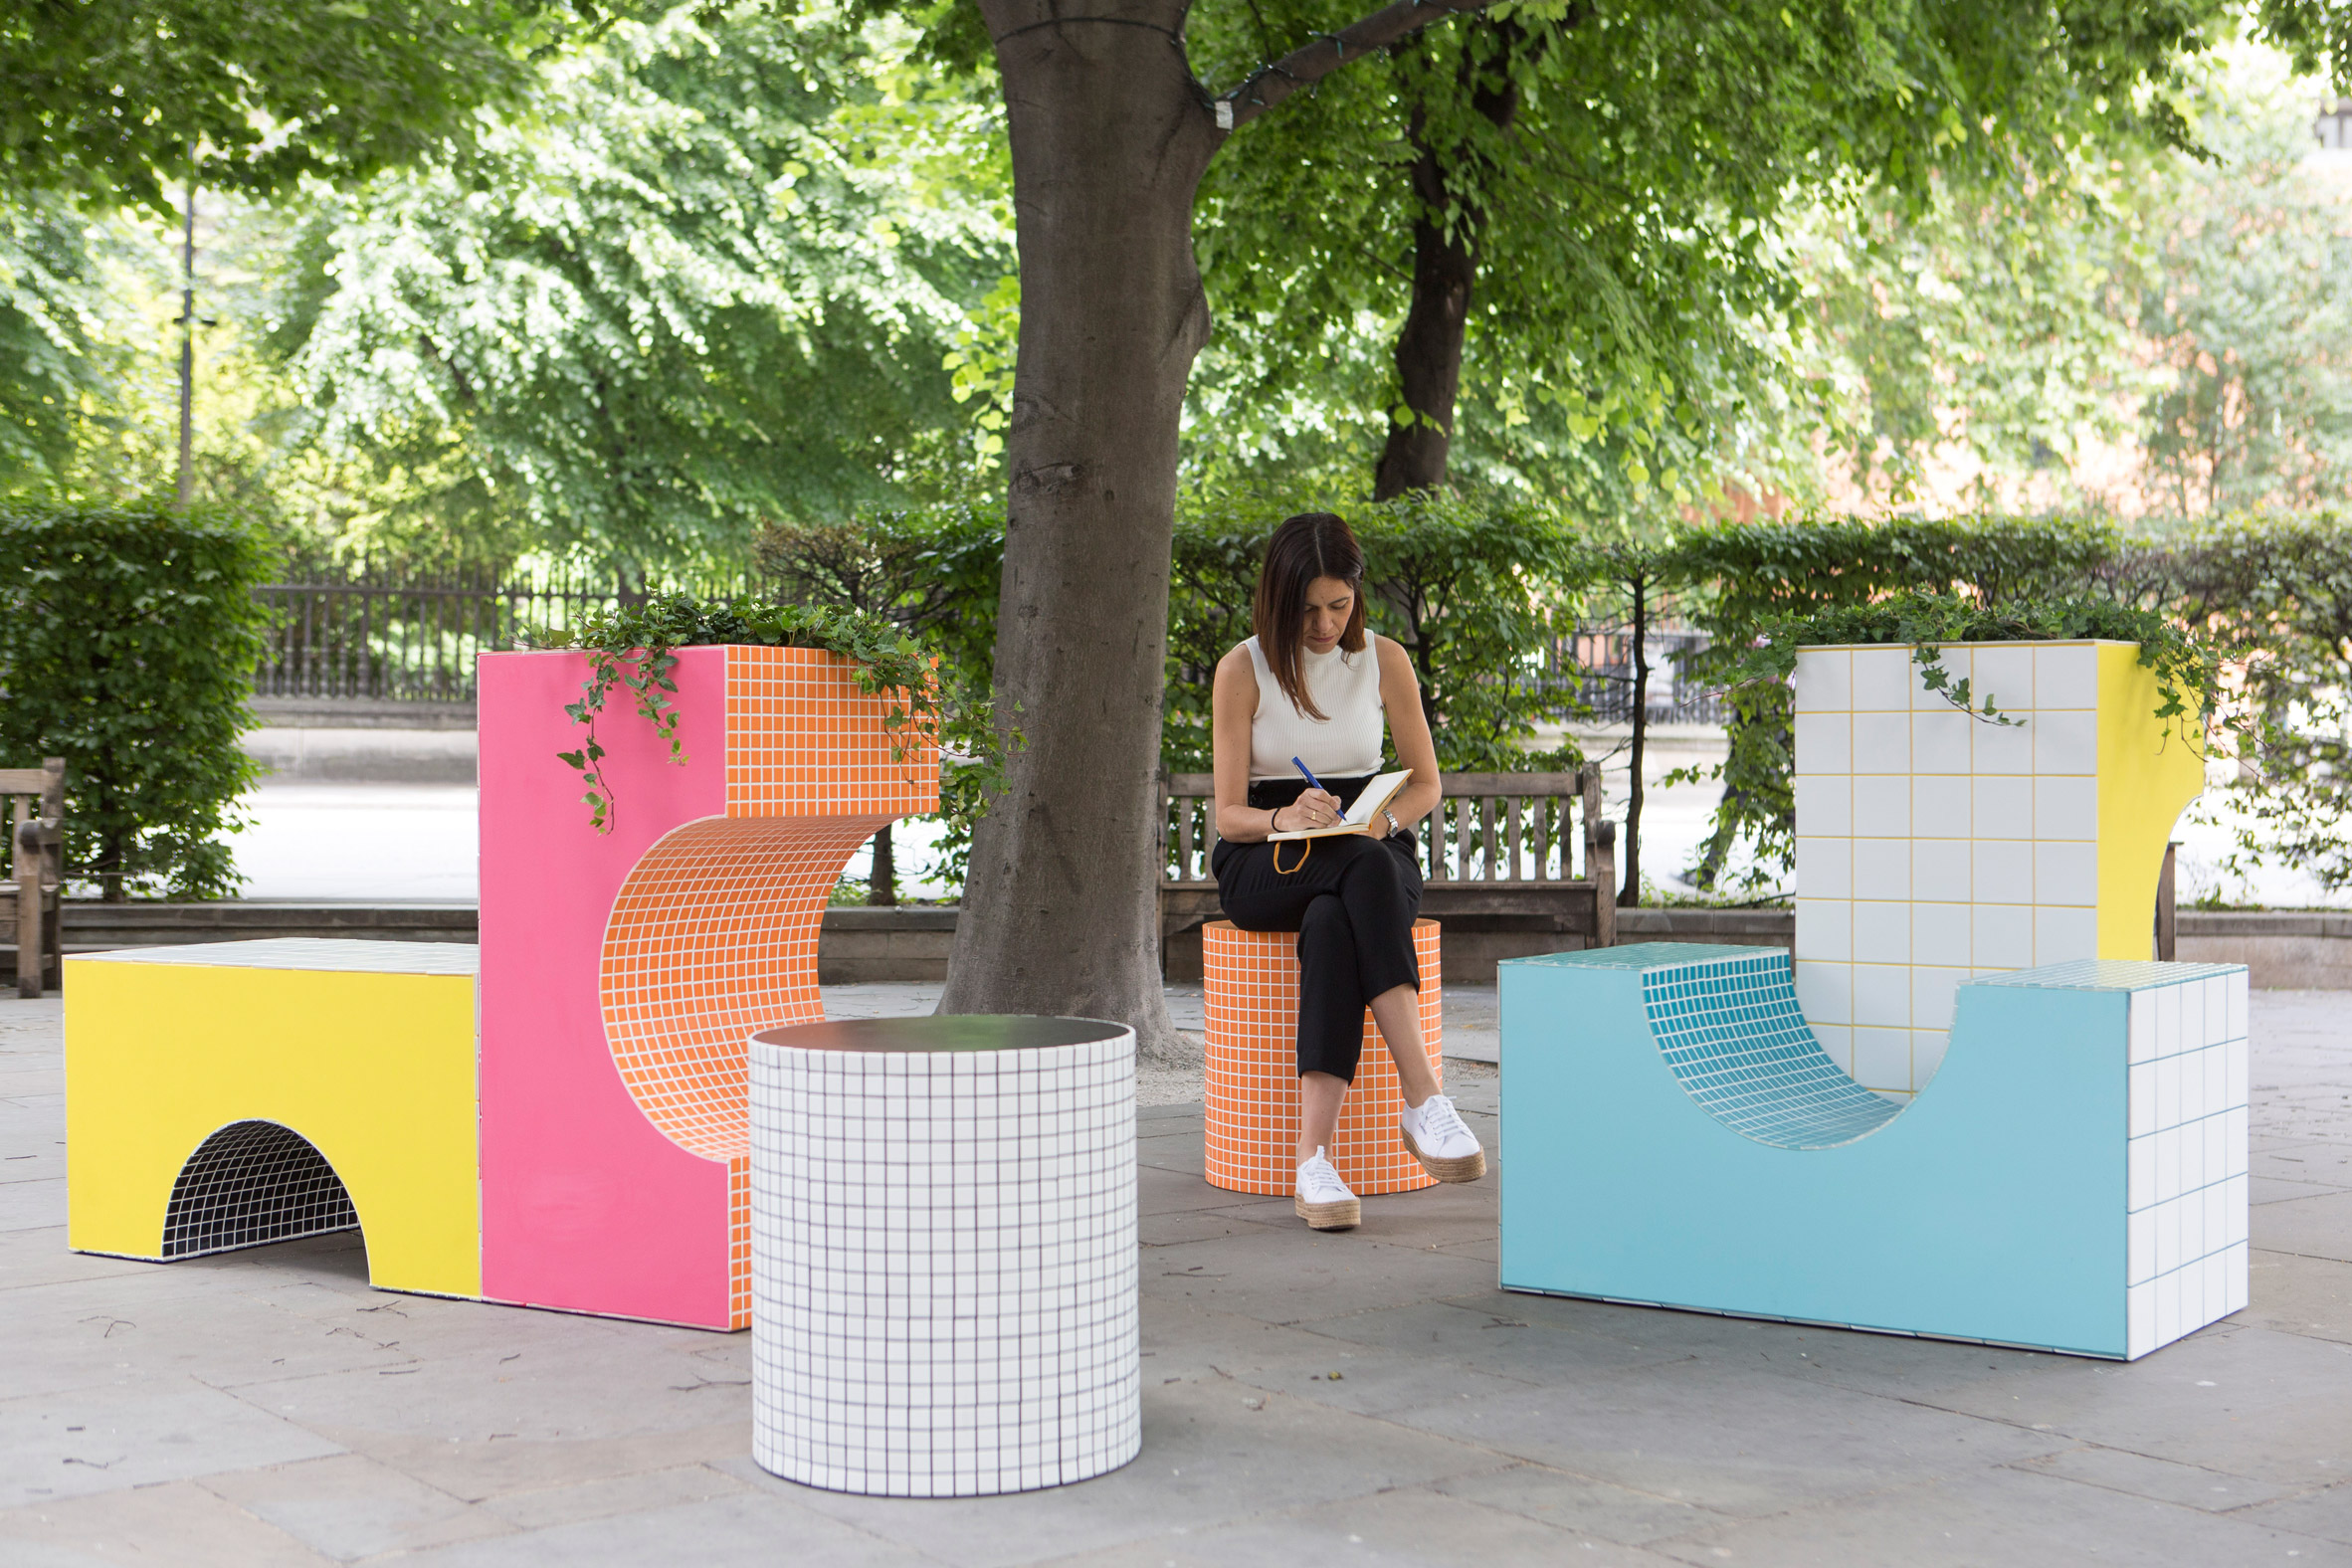 City Benches: City Blocks by Astrian Studio Architects at London Festival of Architecture 